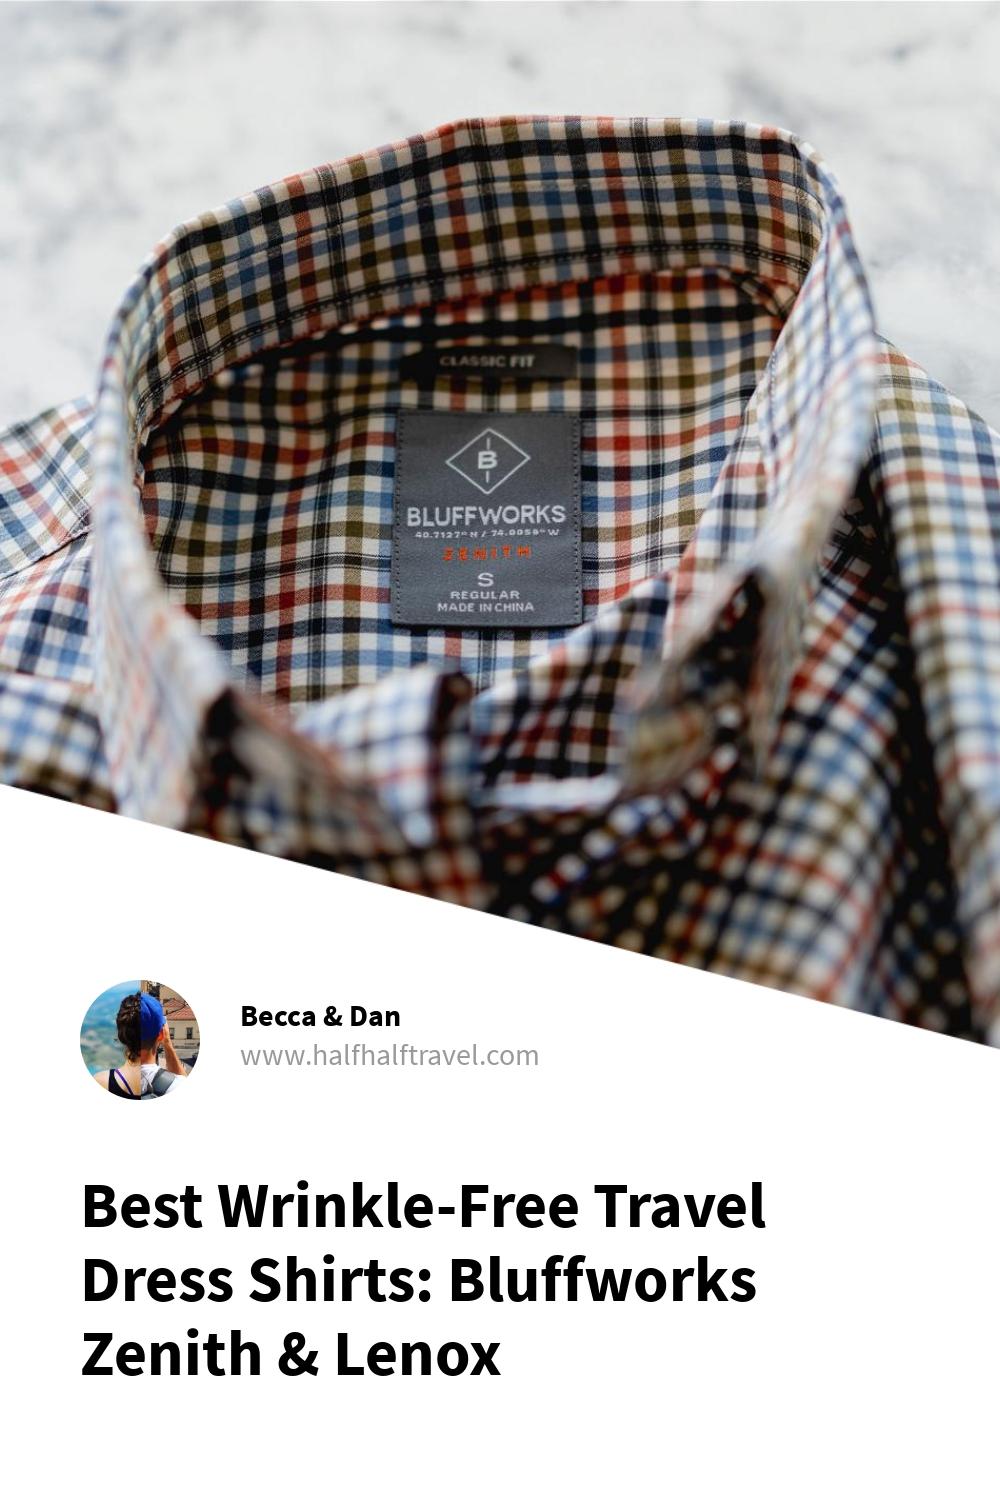 Pinterest image from the 'Best Wrinkle-Free Travel Dress Shirts: Bluffworks Zenith & Lenox' article on Half Half Travel